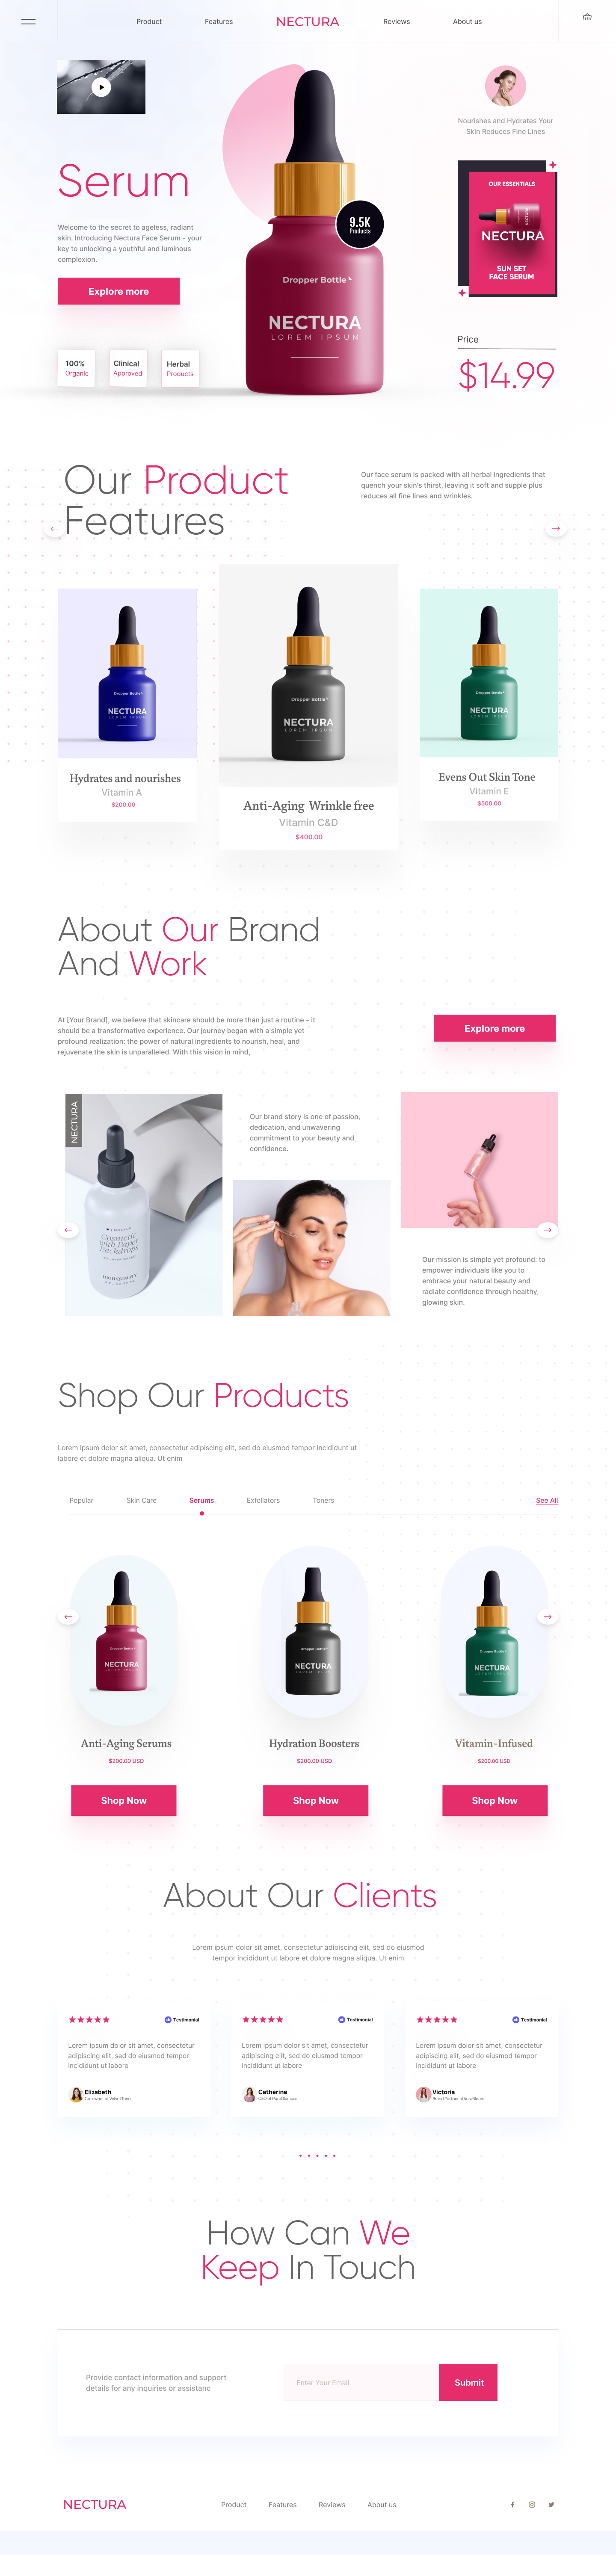 Full Preview of Nectura - Cosmetics Serum Product Website